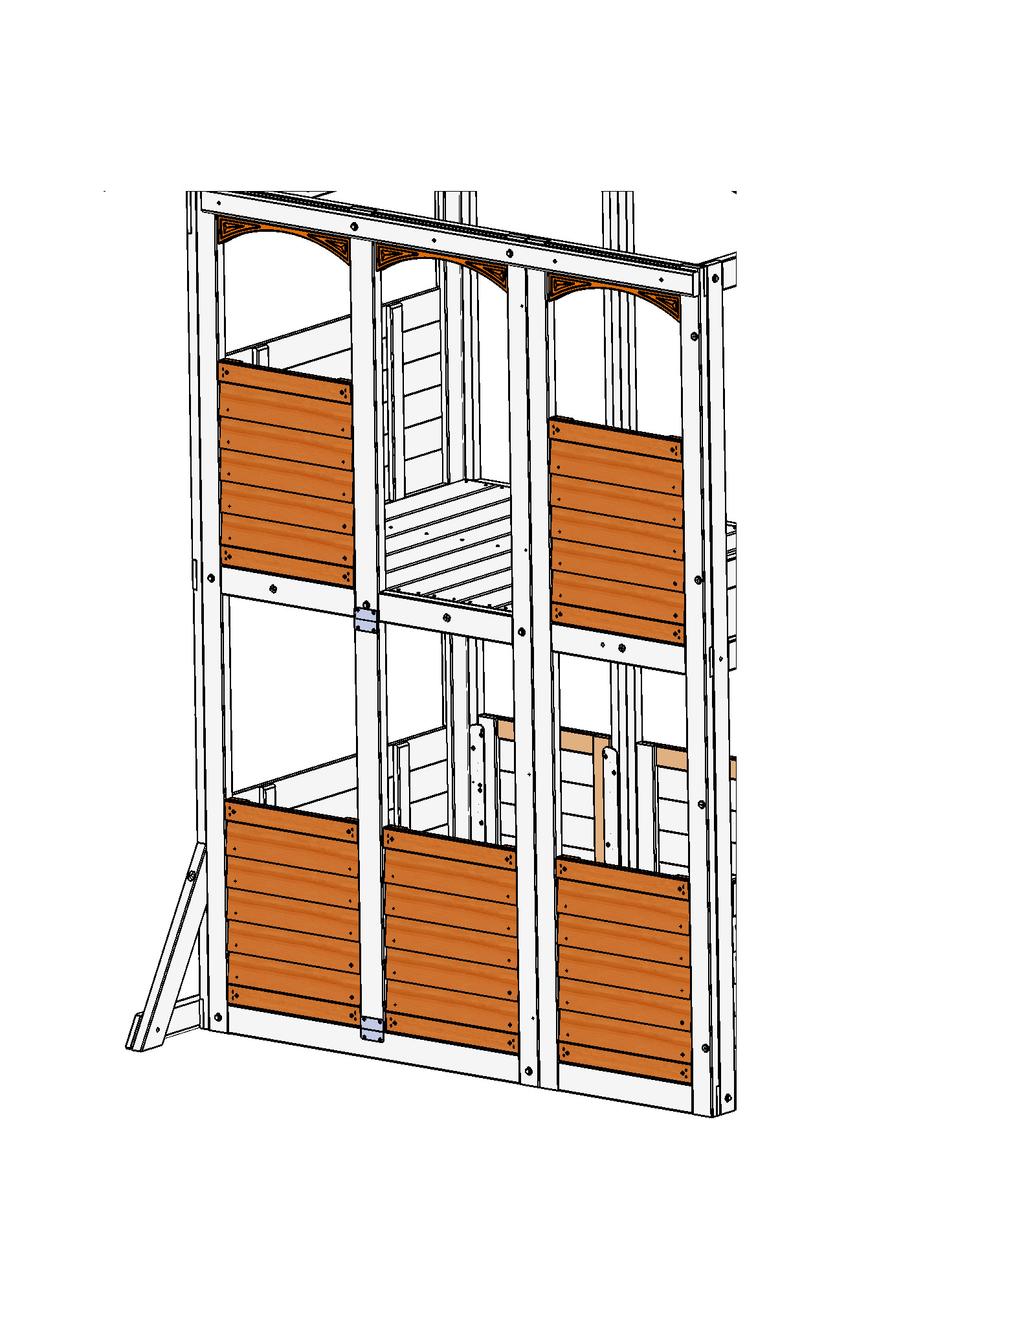 Step 12: Install Window and Wall Inserts Part 3 - Back Wall E: On the Back of the assembly, install 5 (649A) Short Half Walls, 1 in the lower and upper openings of (2677) Narrow Panel, 2 in the lower